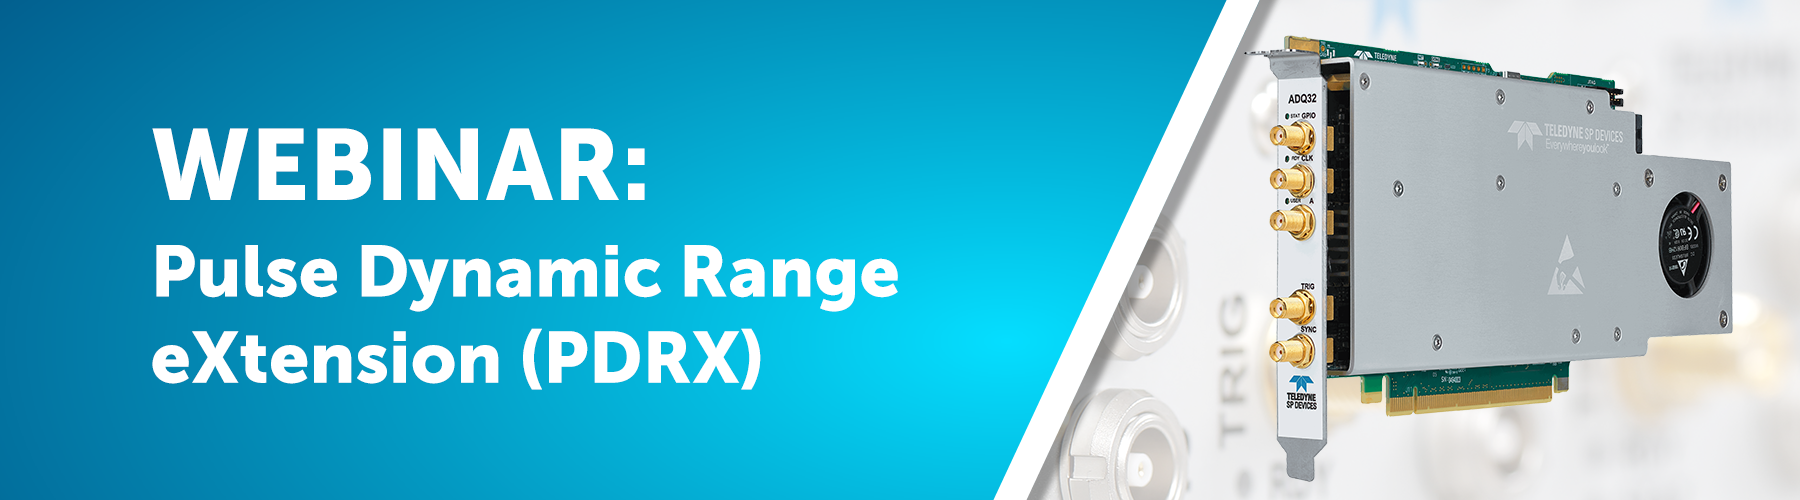 Introduction to Pulse Dynamic Range Extension Banner